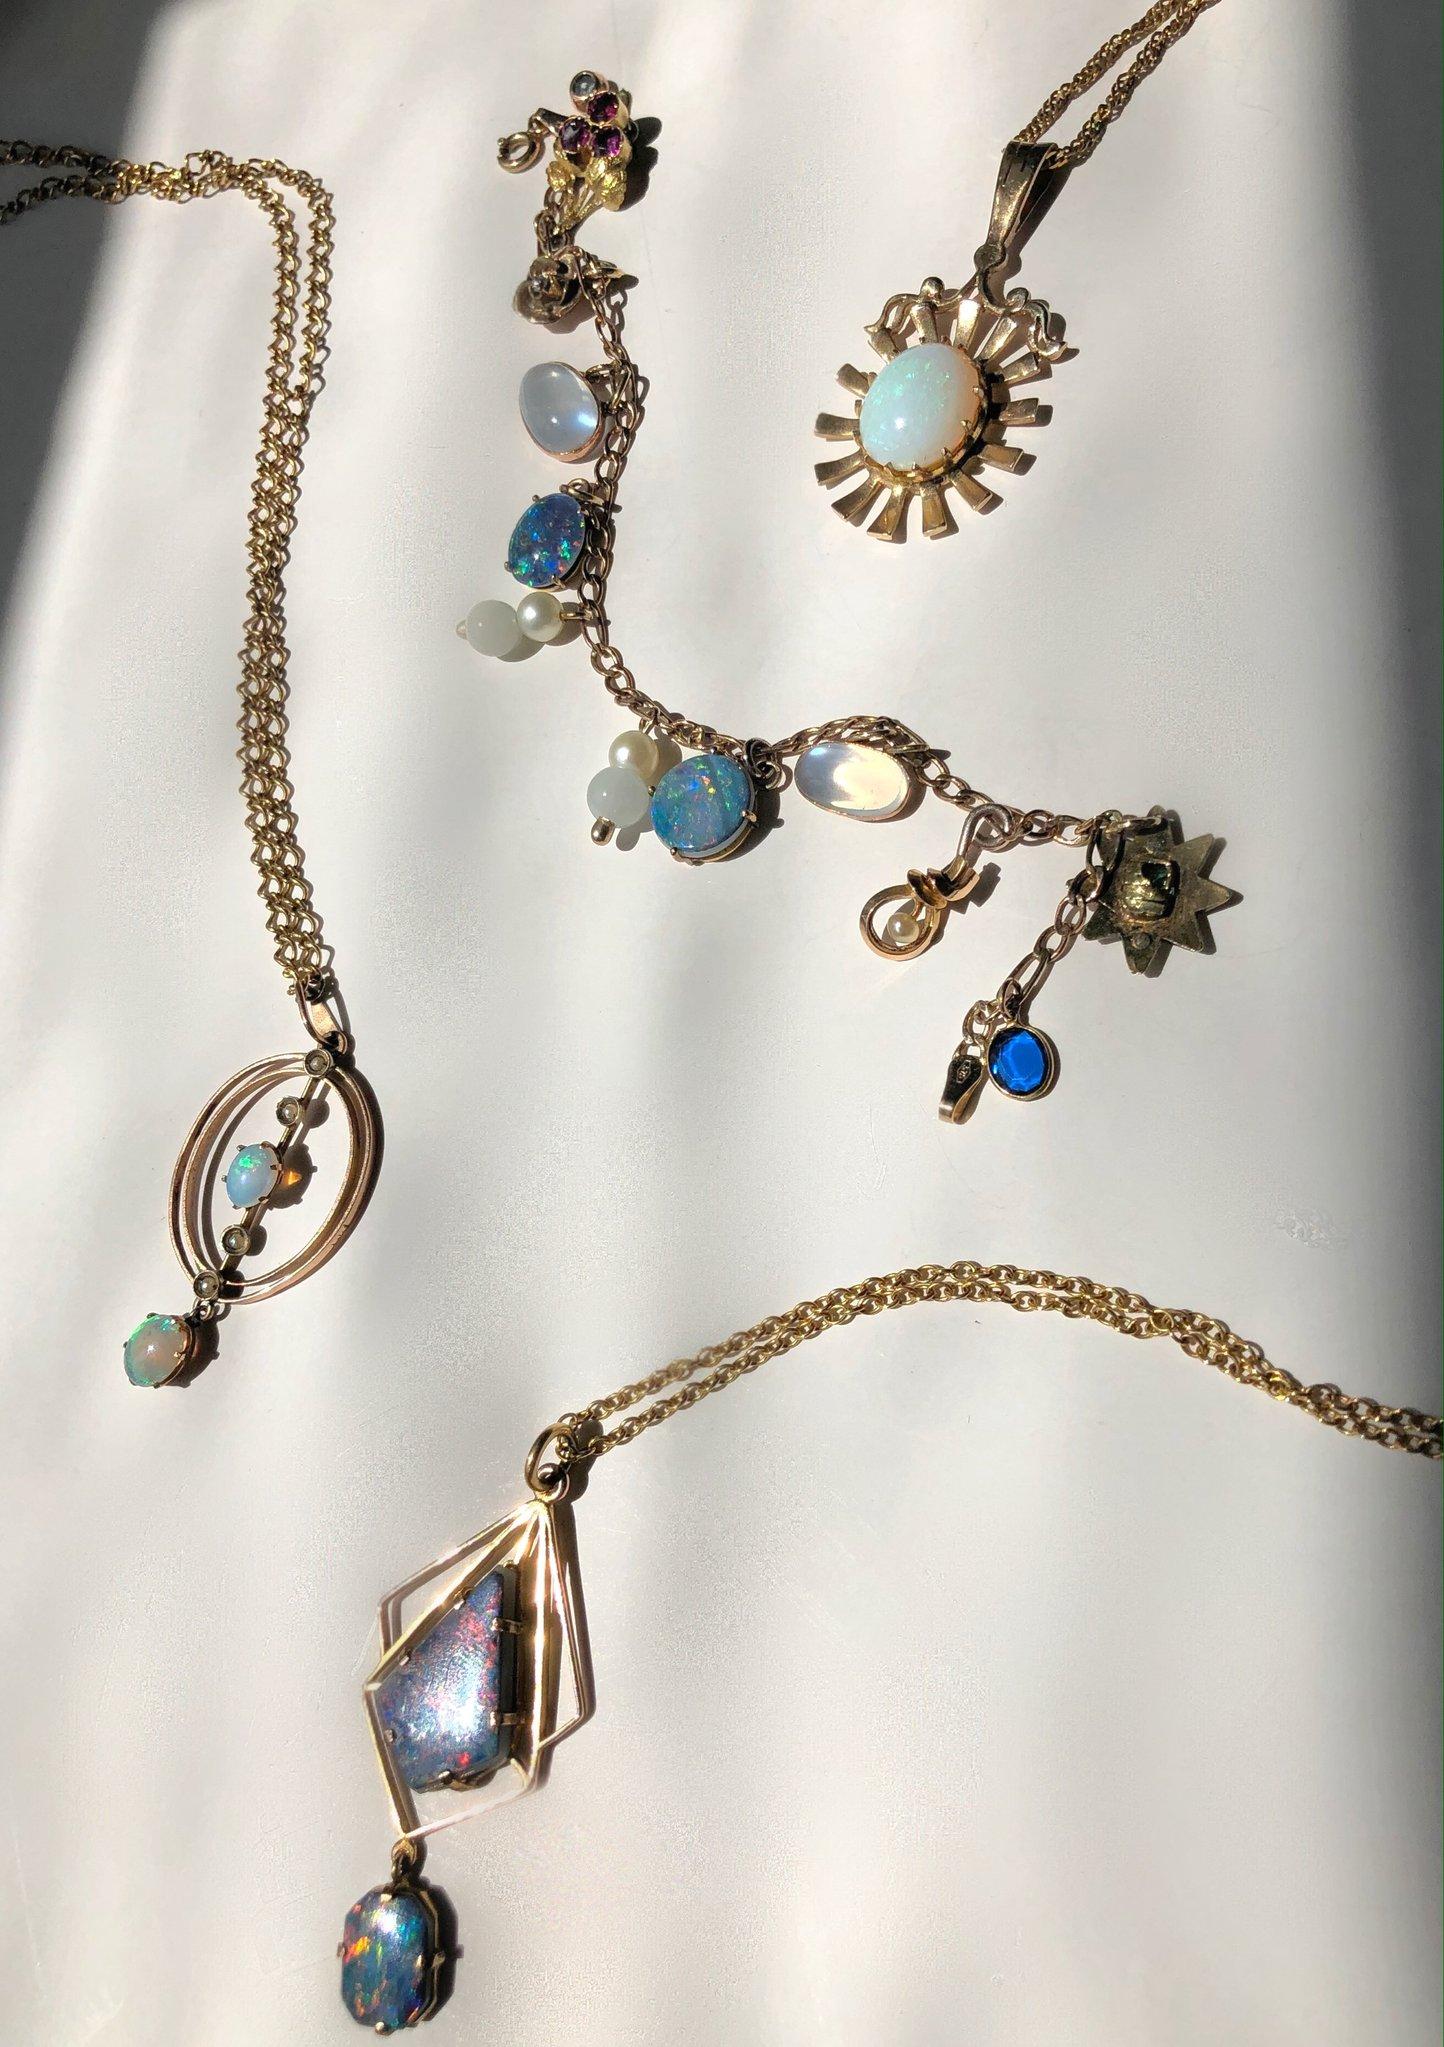 This incredible one-off piece is set on a solid 9 karat gold chain, there are twelve charms in total with a variety of very special stones, including diamonds, pearls, emeralds, aquamarine, opals, garnets, moonstone, quartz and more. A truly unique